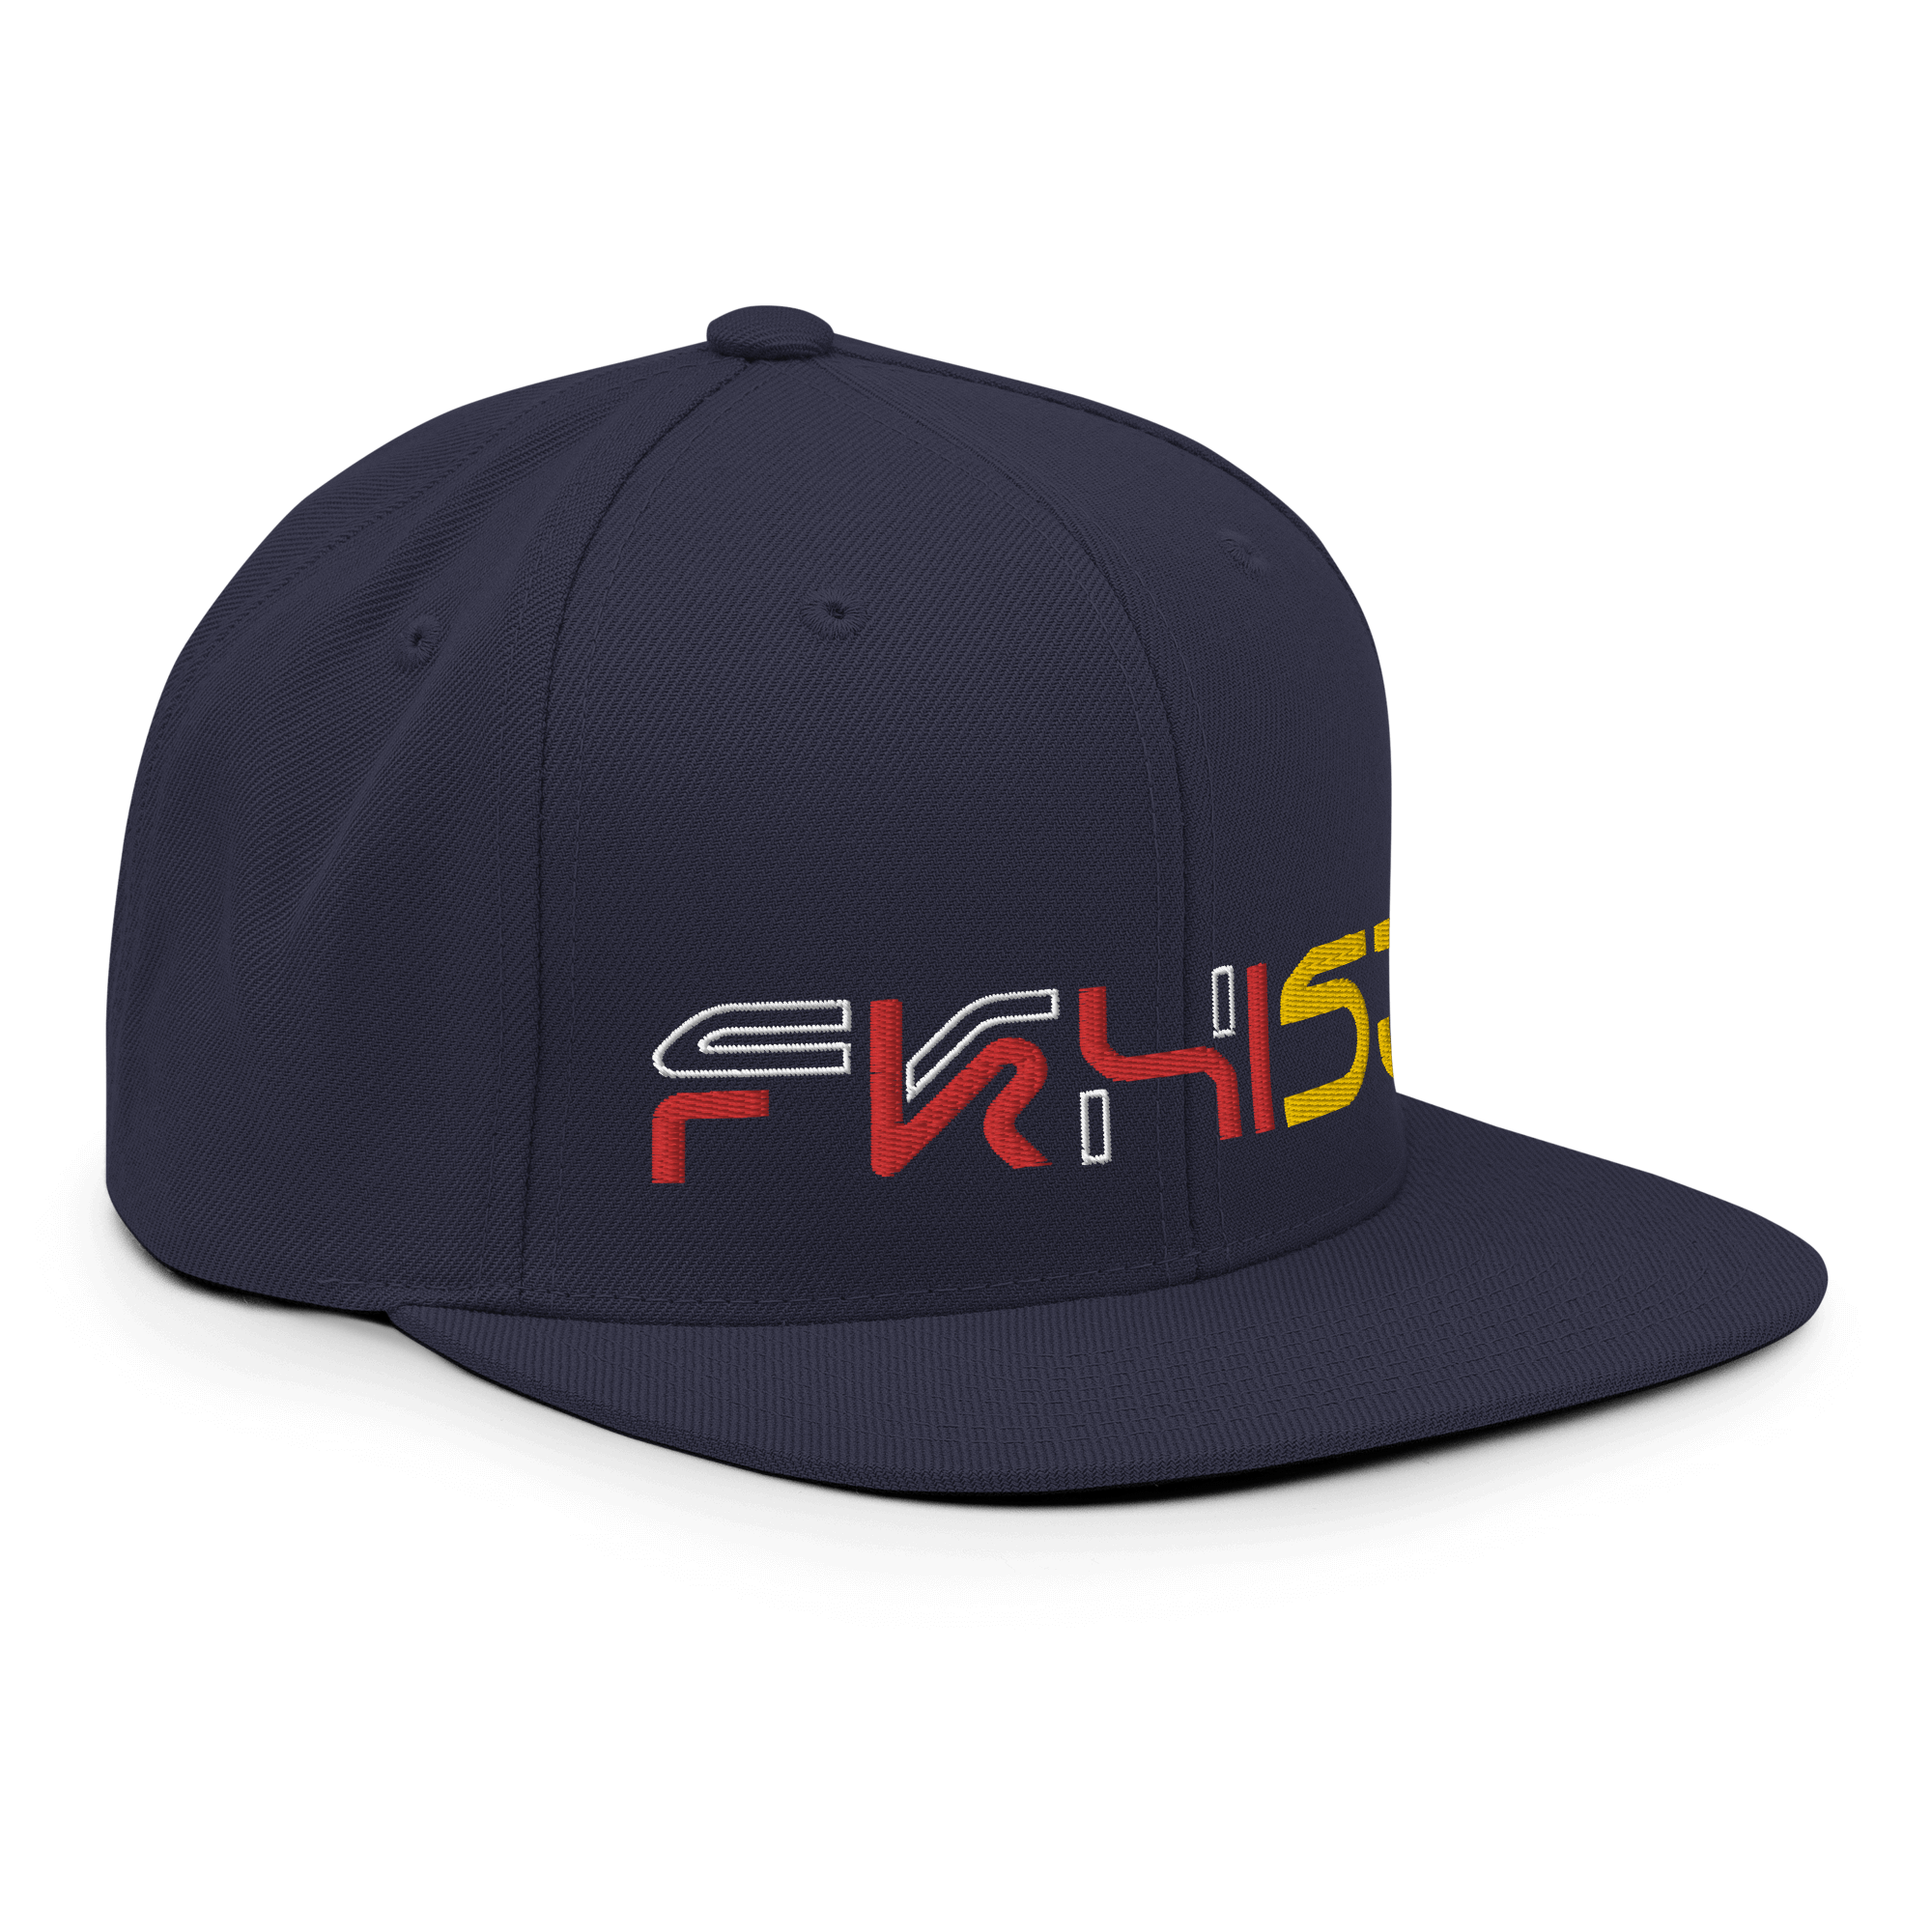 FKXI 53 Snapback CapDive into style with the FKXI 53 Snapback Cap – a classic fit, flat brim, and full buckram structure that effortlessly blends comfort and flair. The adjustable snap closure ensures a perfect fit for everyone. Crafted exclusively for yo